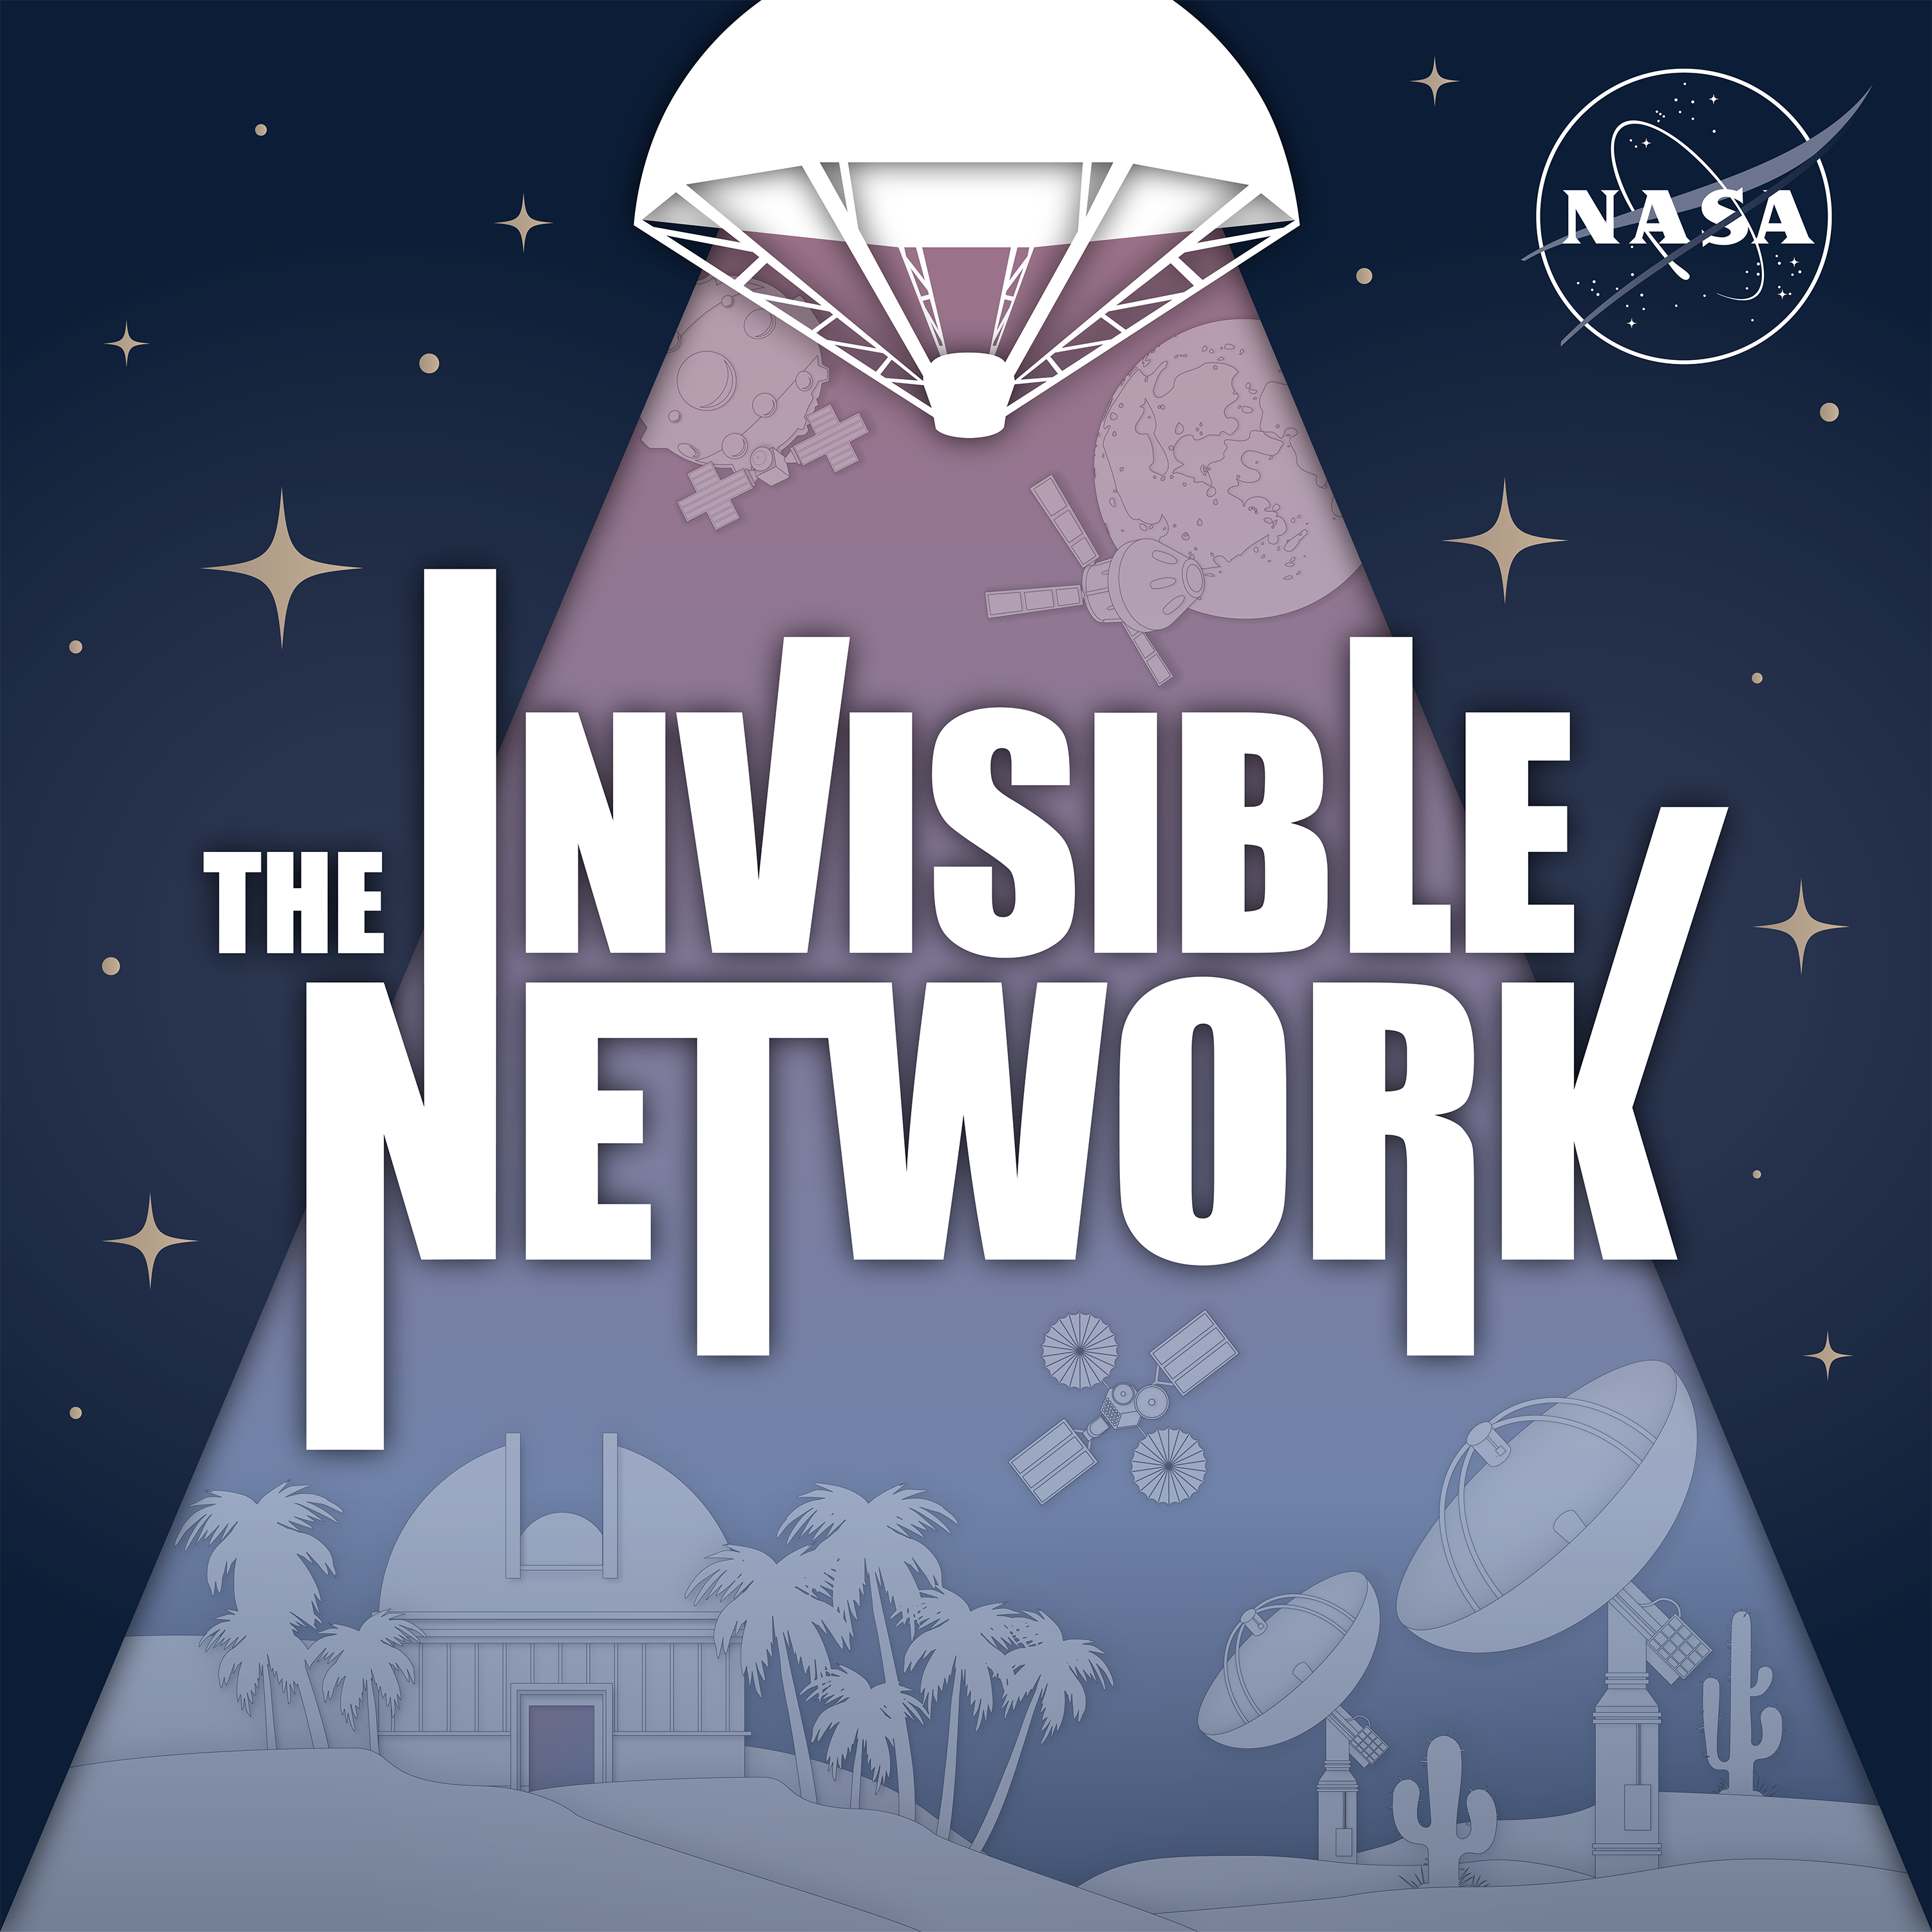 The cover art for the "The Invisible Network" podcast